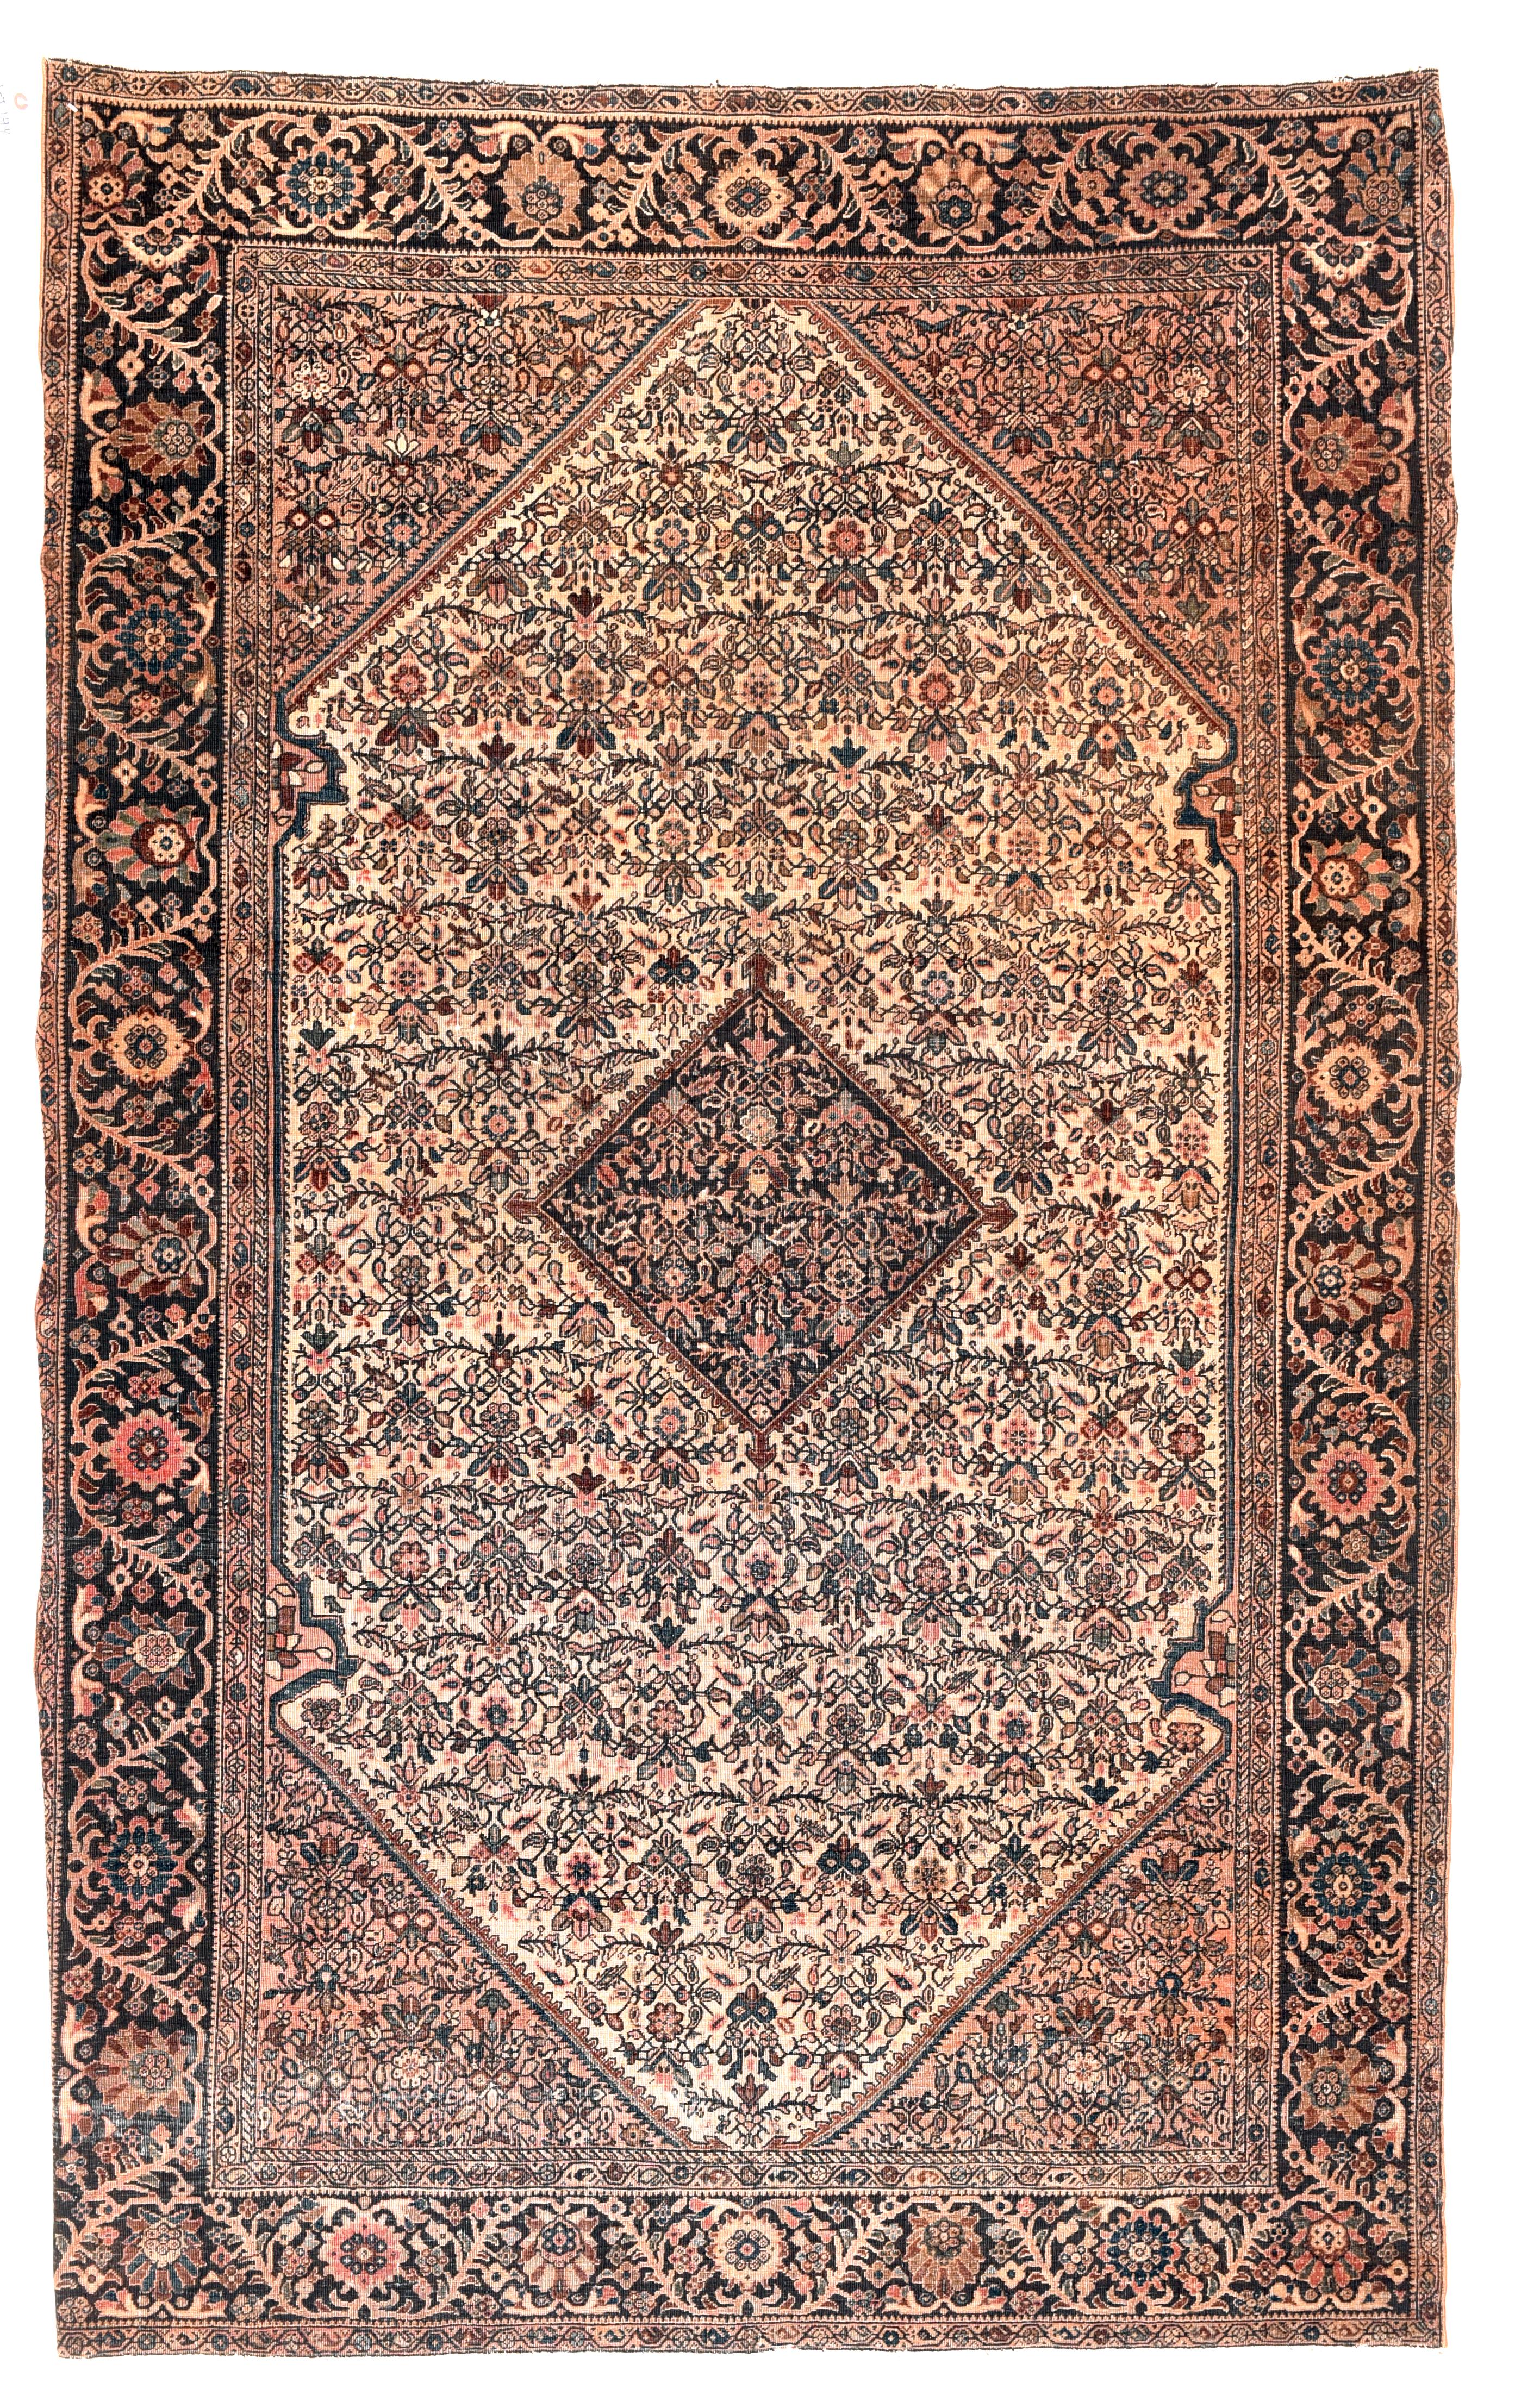 Antique Sarouk Rug 4'1'' x 6'5'' In Excellent Condition For Sale In New York, NY